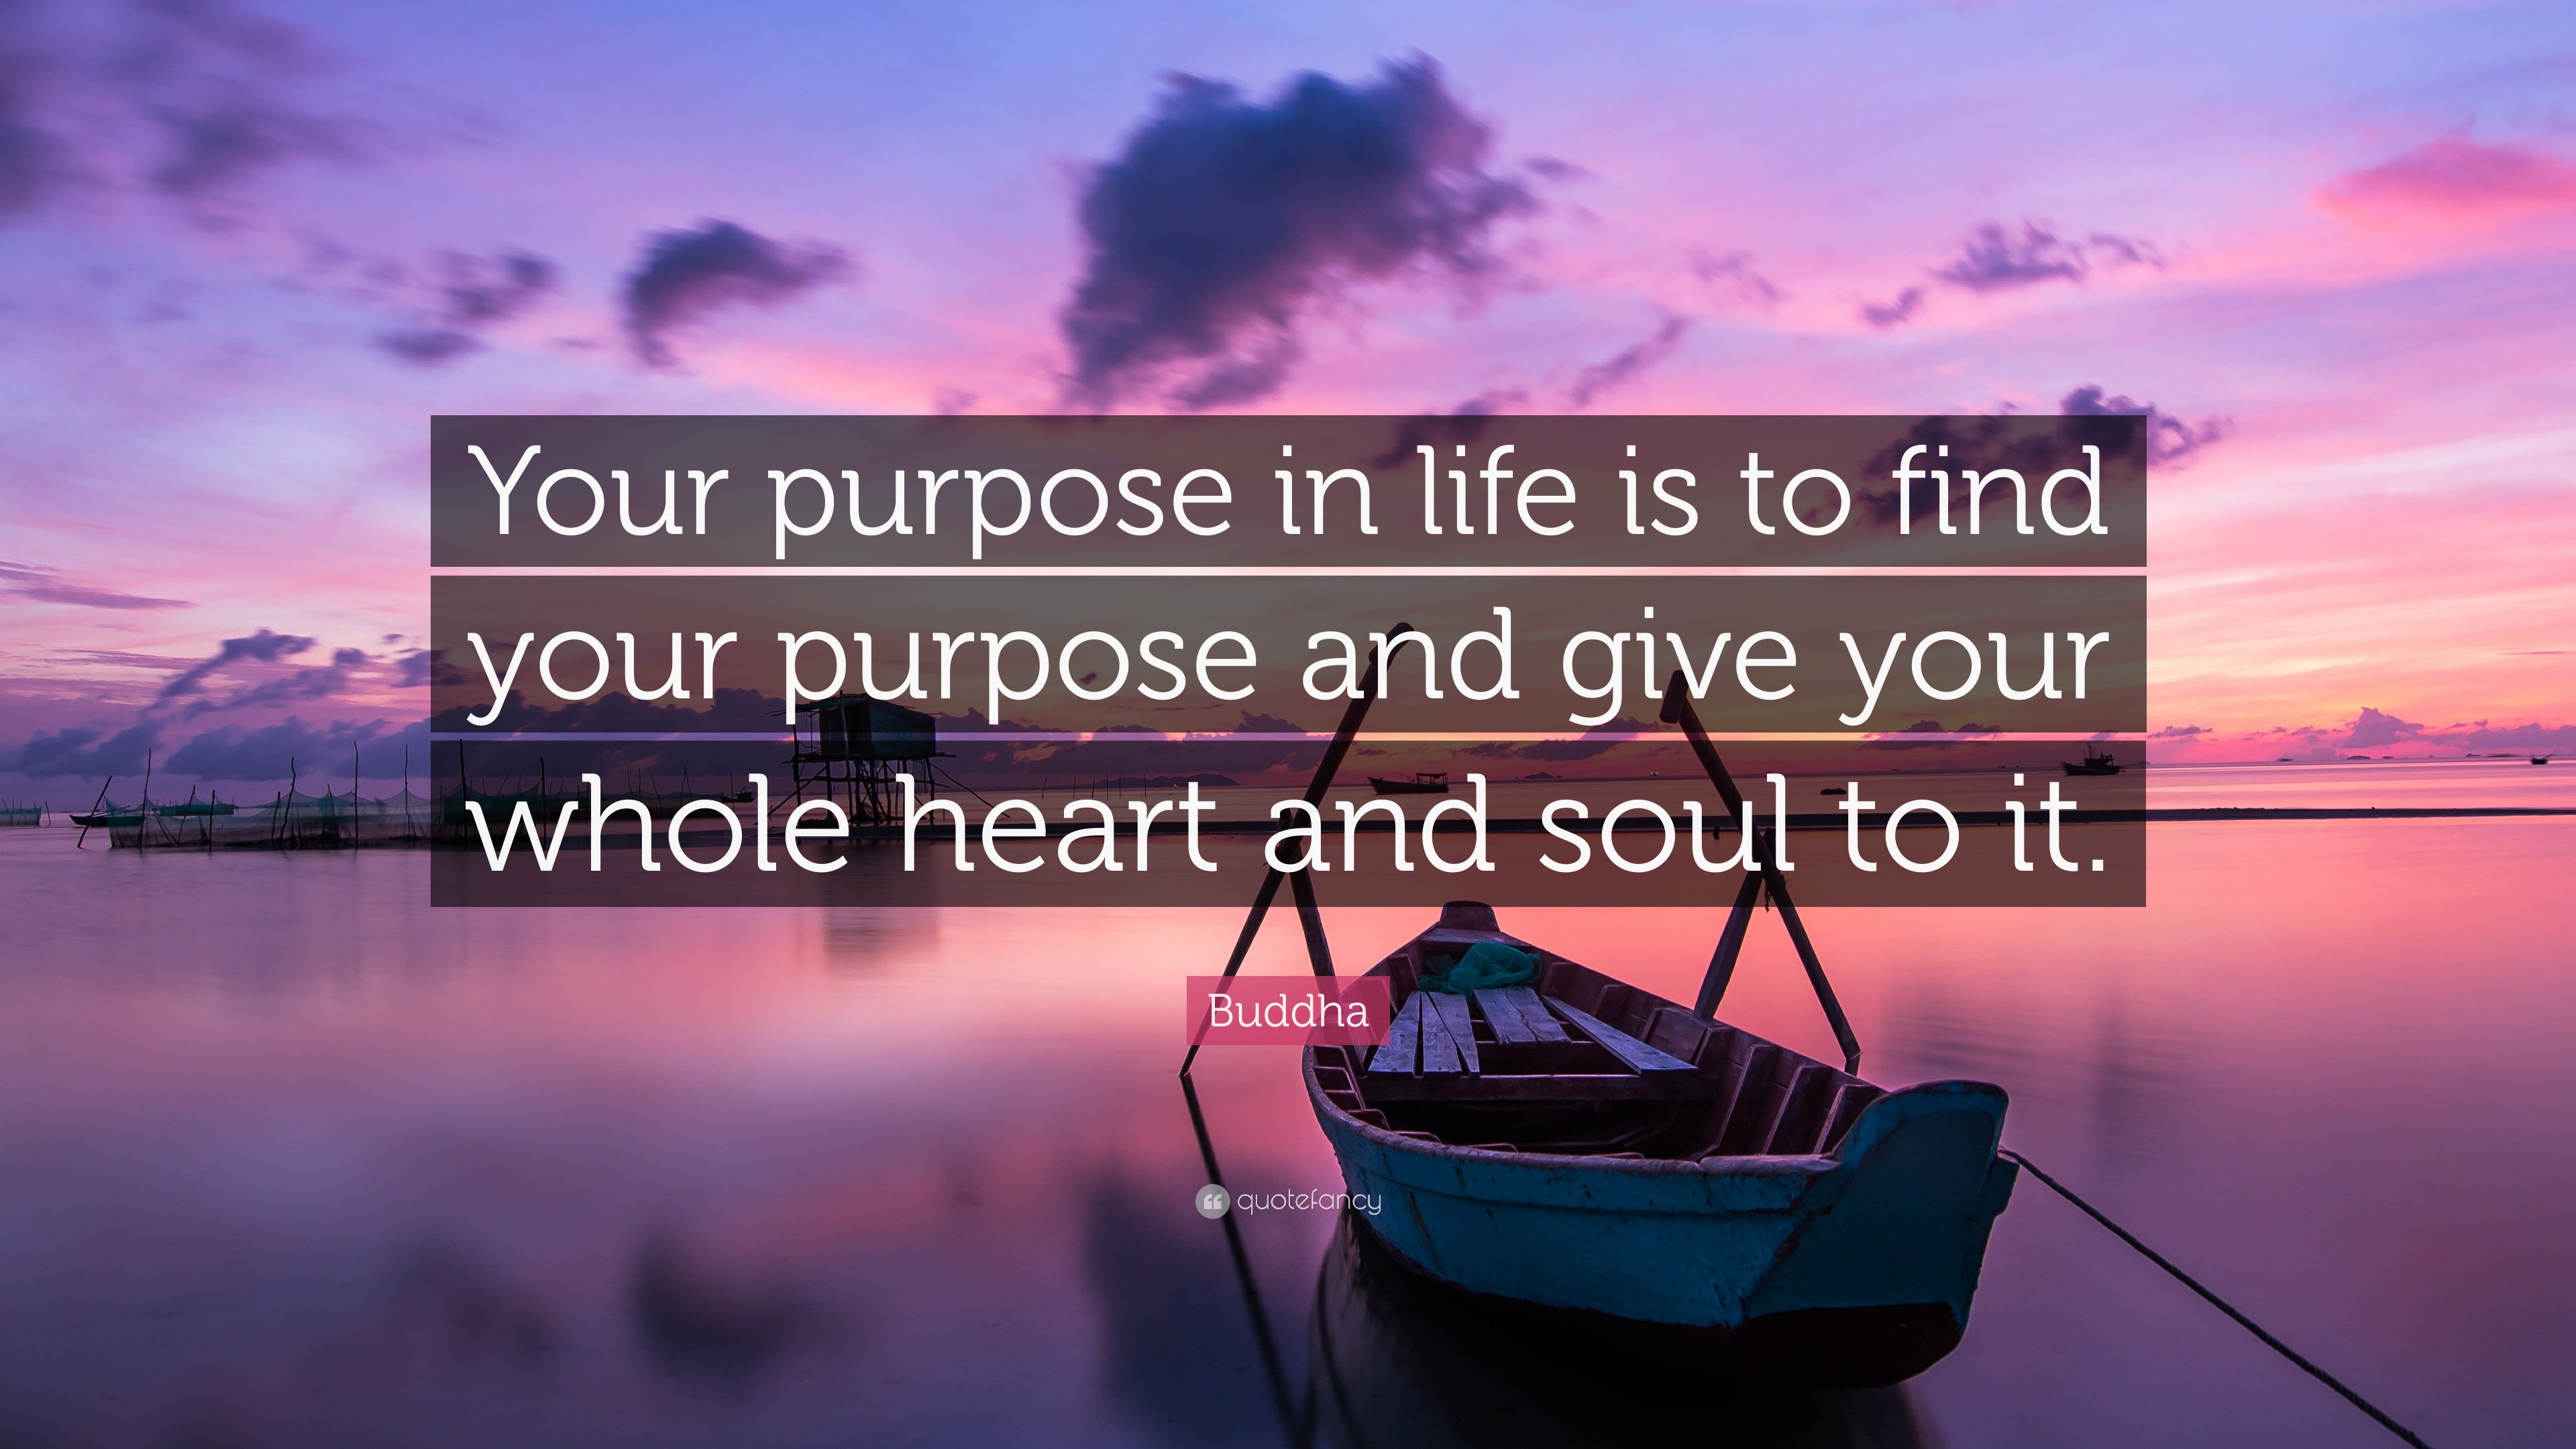 Buddha Quote: “Your purpose in life is to find your purpose and give